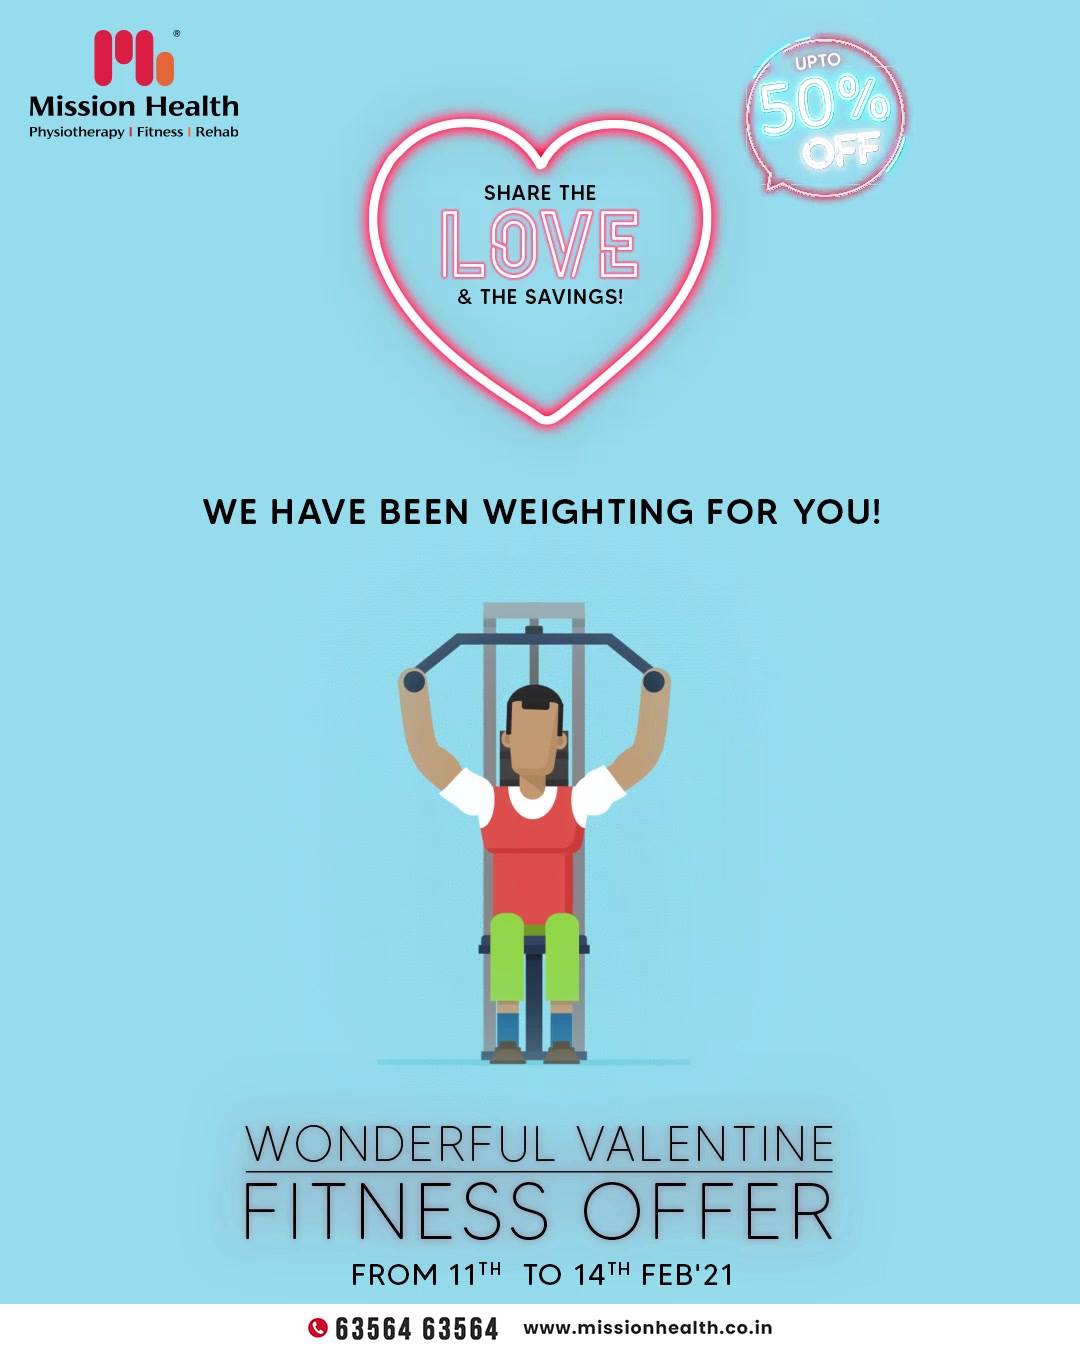 Hello fitness enthusiasts; are you yet to become a member of Mission Health?
The wonderful valentine fitness offer is still weighting for you; share the love and the savings. 
Make a move and get enrolled today because the offer is valid only till 14th February 2021.

Mission Health Helpline Number: +916356463564
www.missionhealth.co.in

#ValentineFitnessOffer #FitnessisFirstLove #MissionHealth #Fitness #PersonalTraining #FatToFit #Transform #GroupFitness #Slimming #MovementIsLife